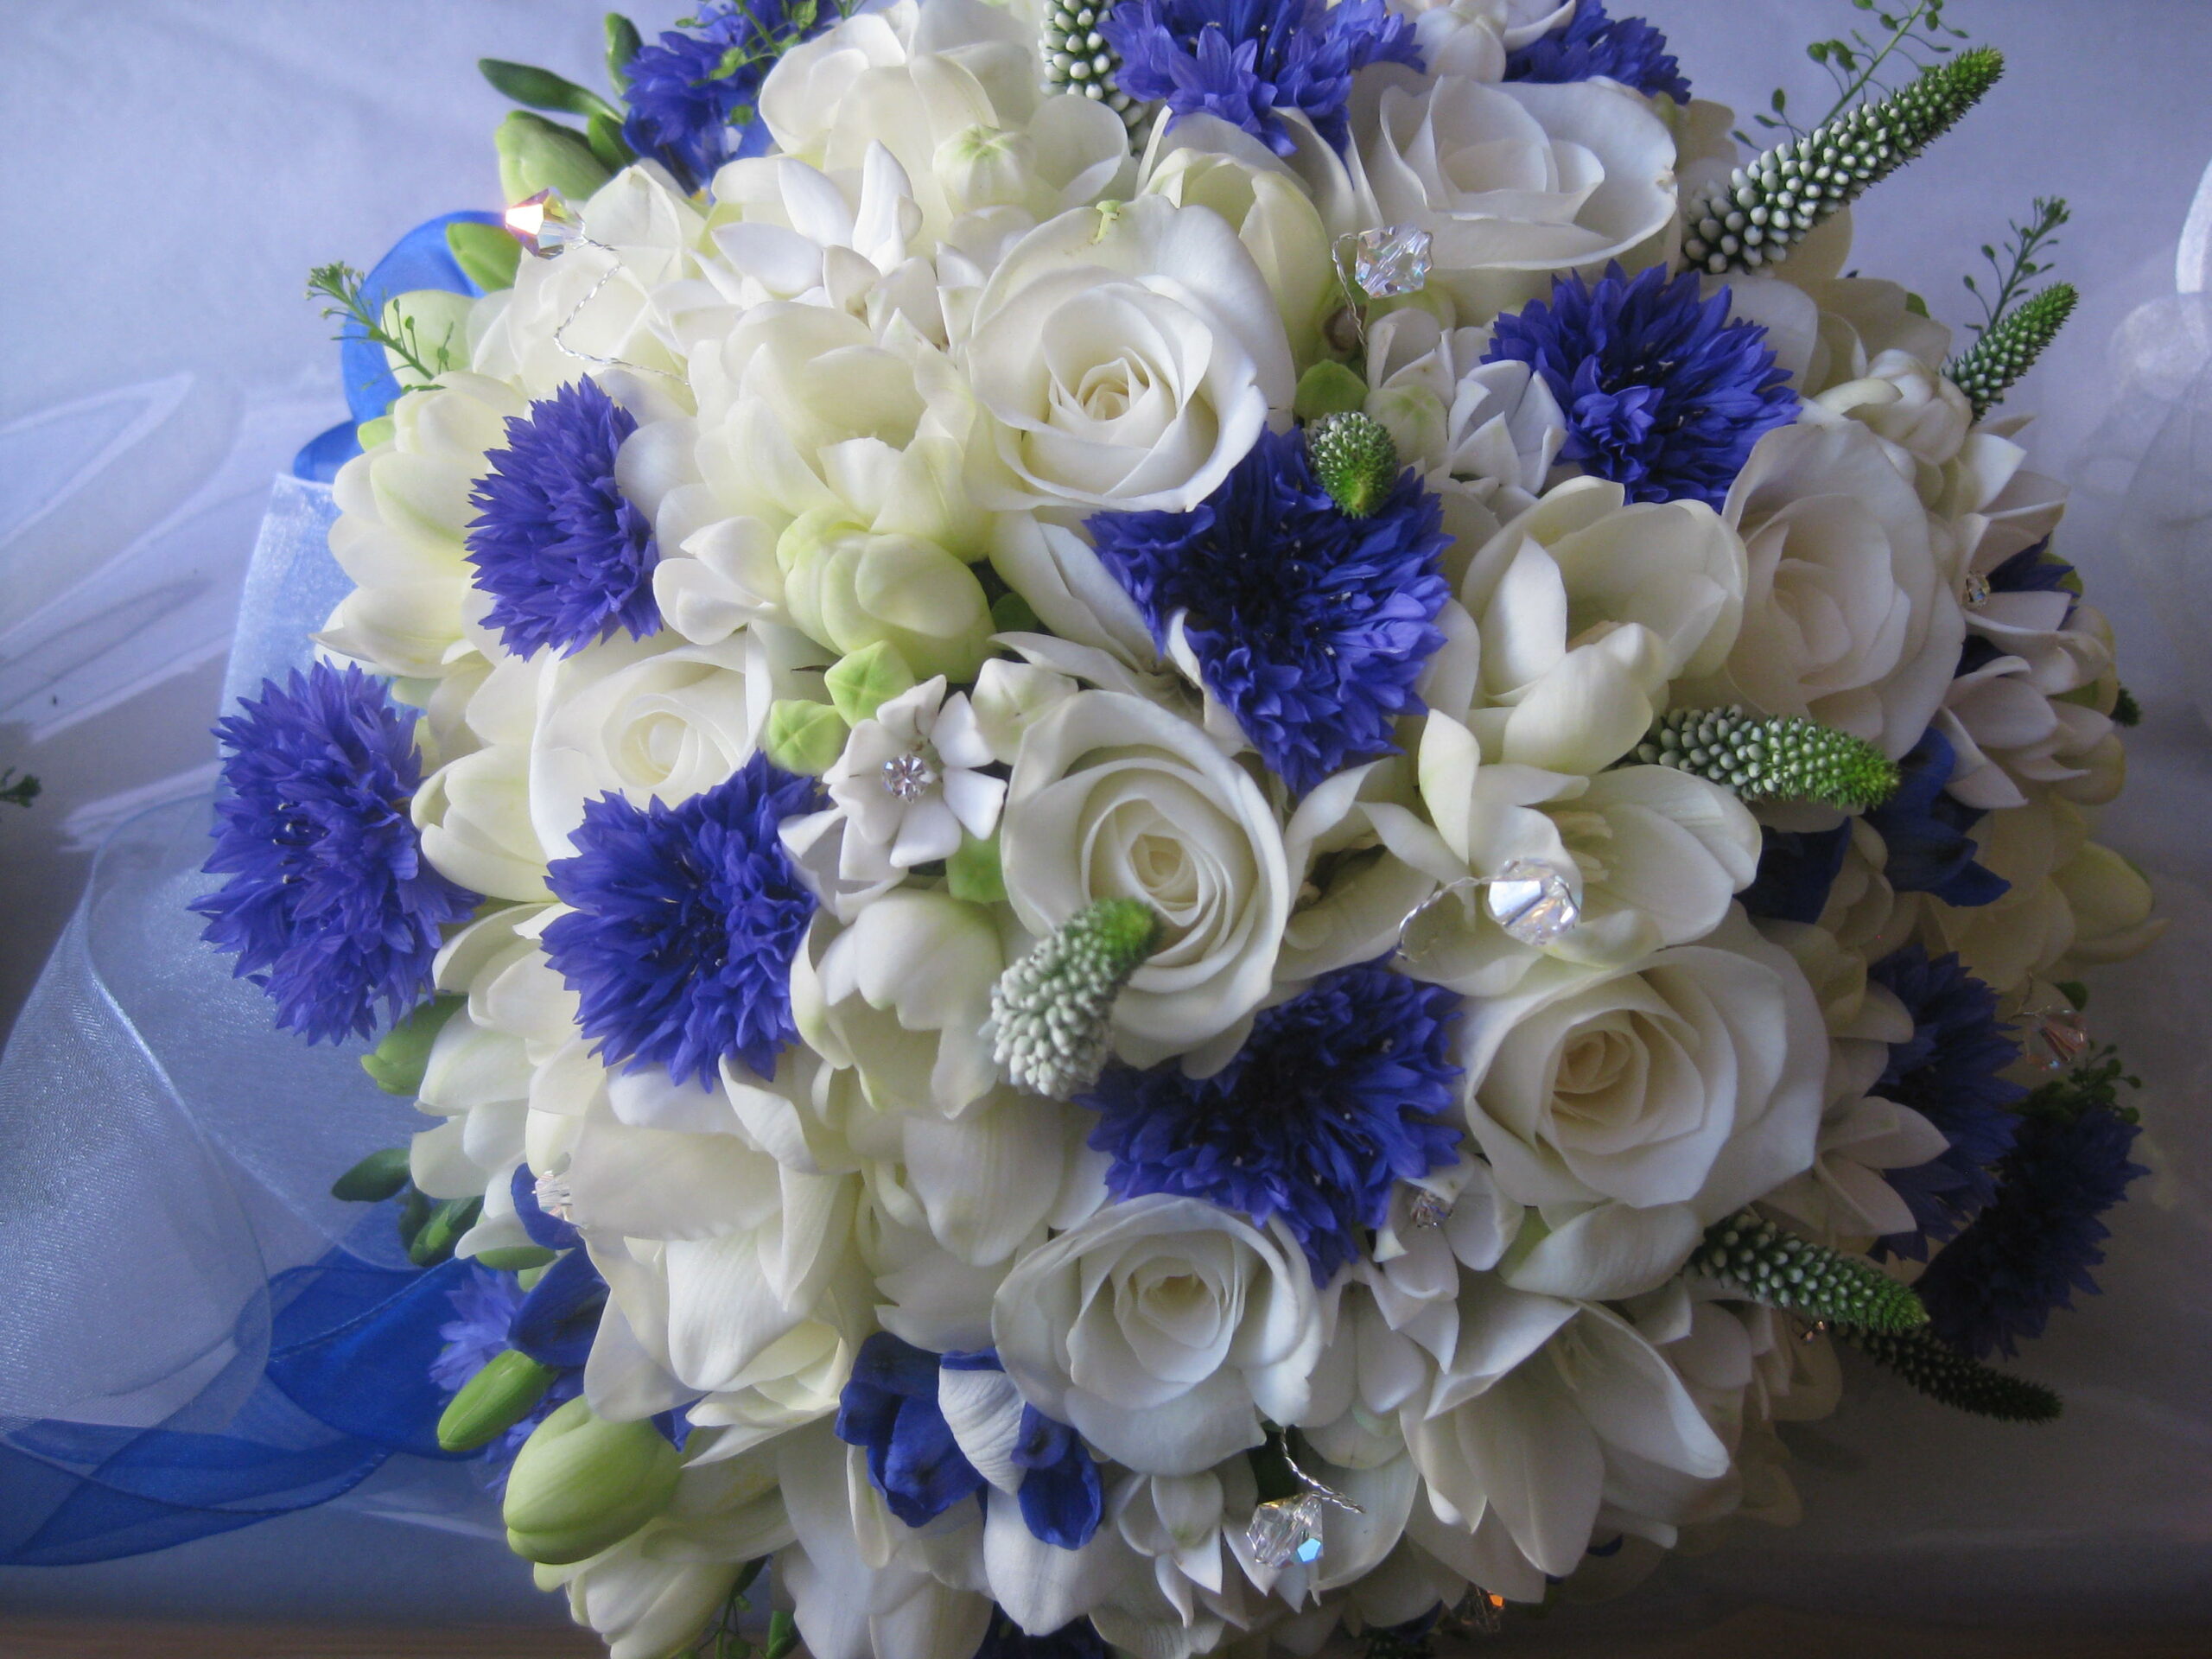 Cornflowers can be stunning when paired with crisp white flowers of any kind. Image: Jo Hicks Flowers